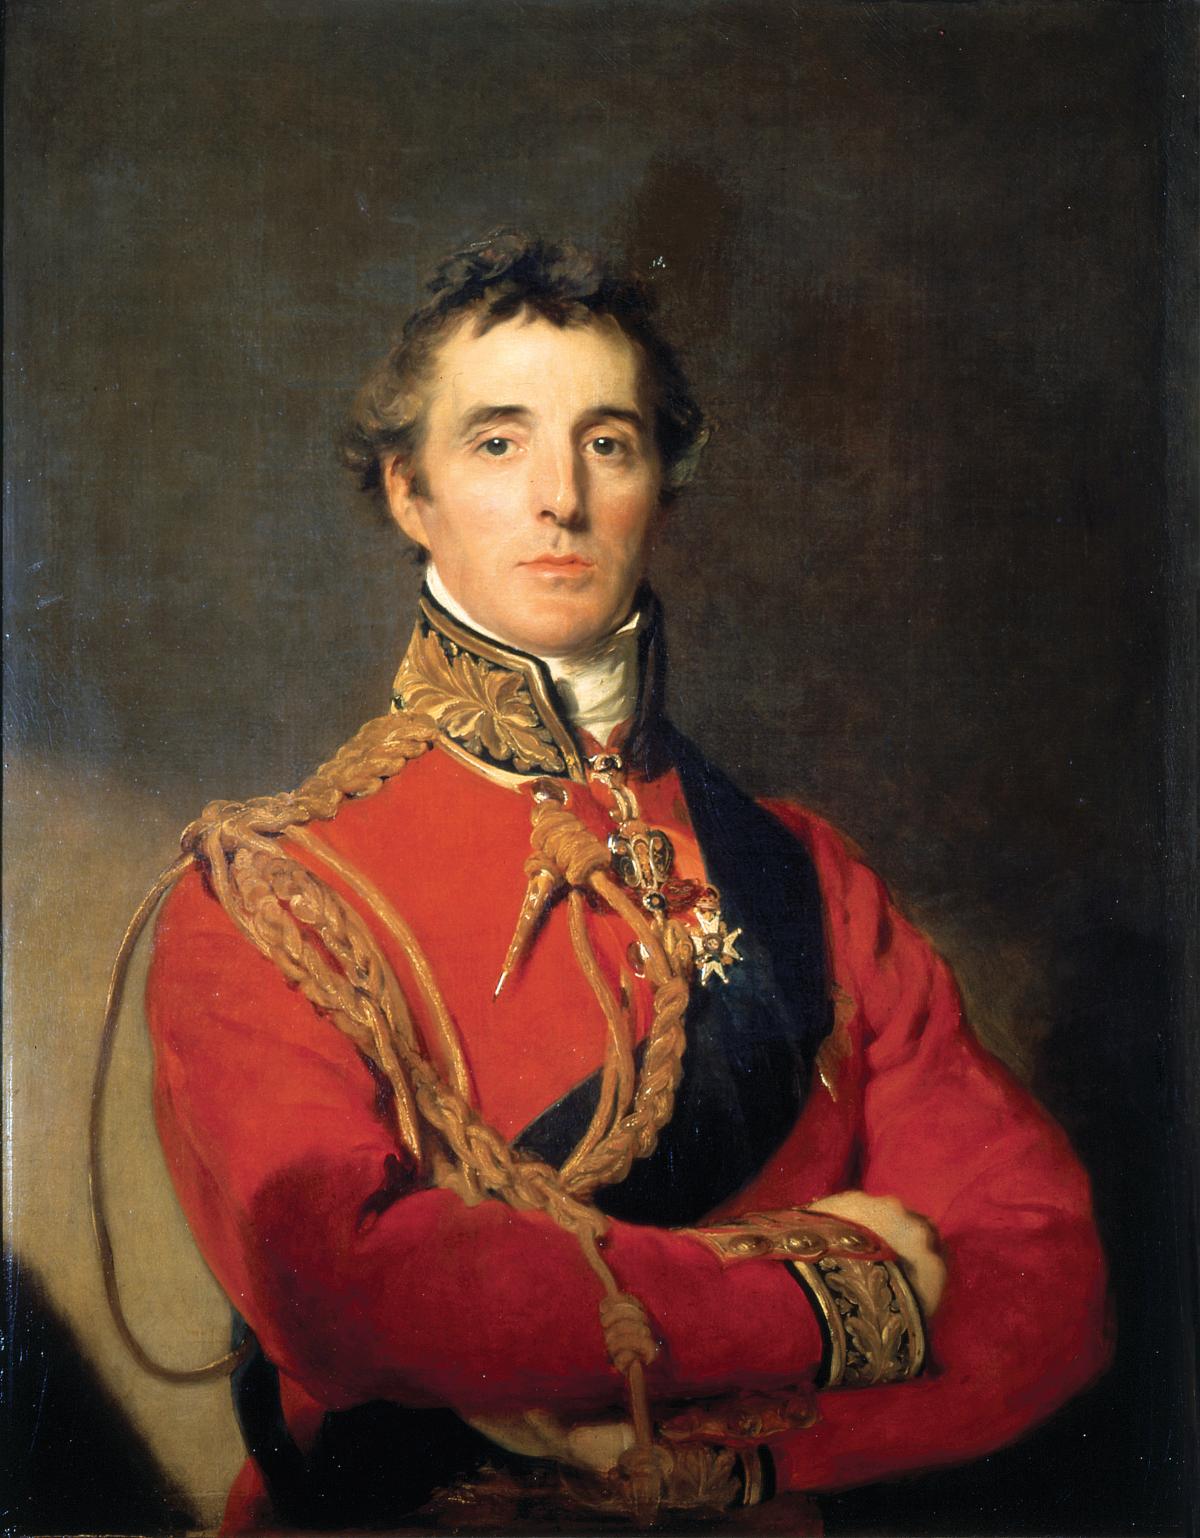 The General in a red tunic decorated with gold braid, with arms crossed across his chest